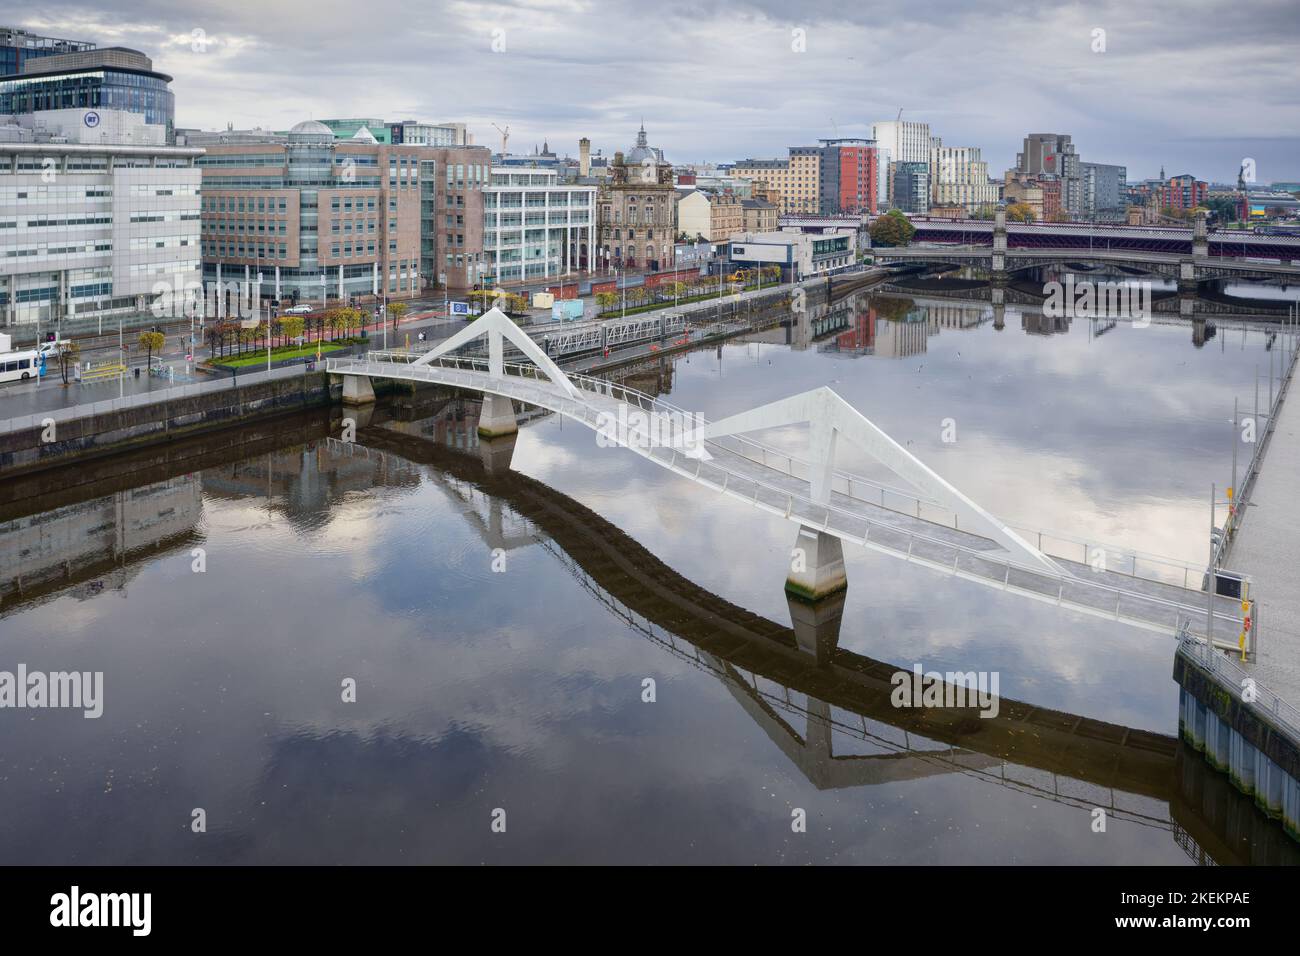 The Squiggly Bridge crossing the River Clyde to Broomielaw Stock Photo